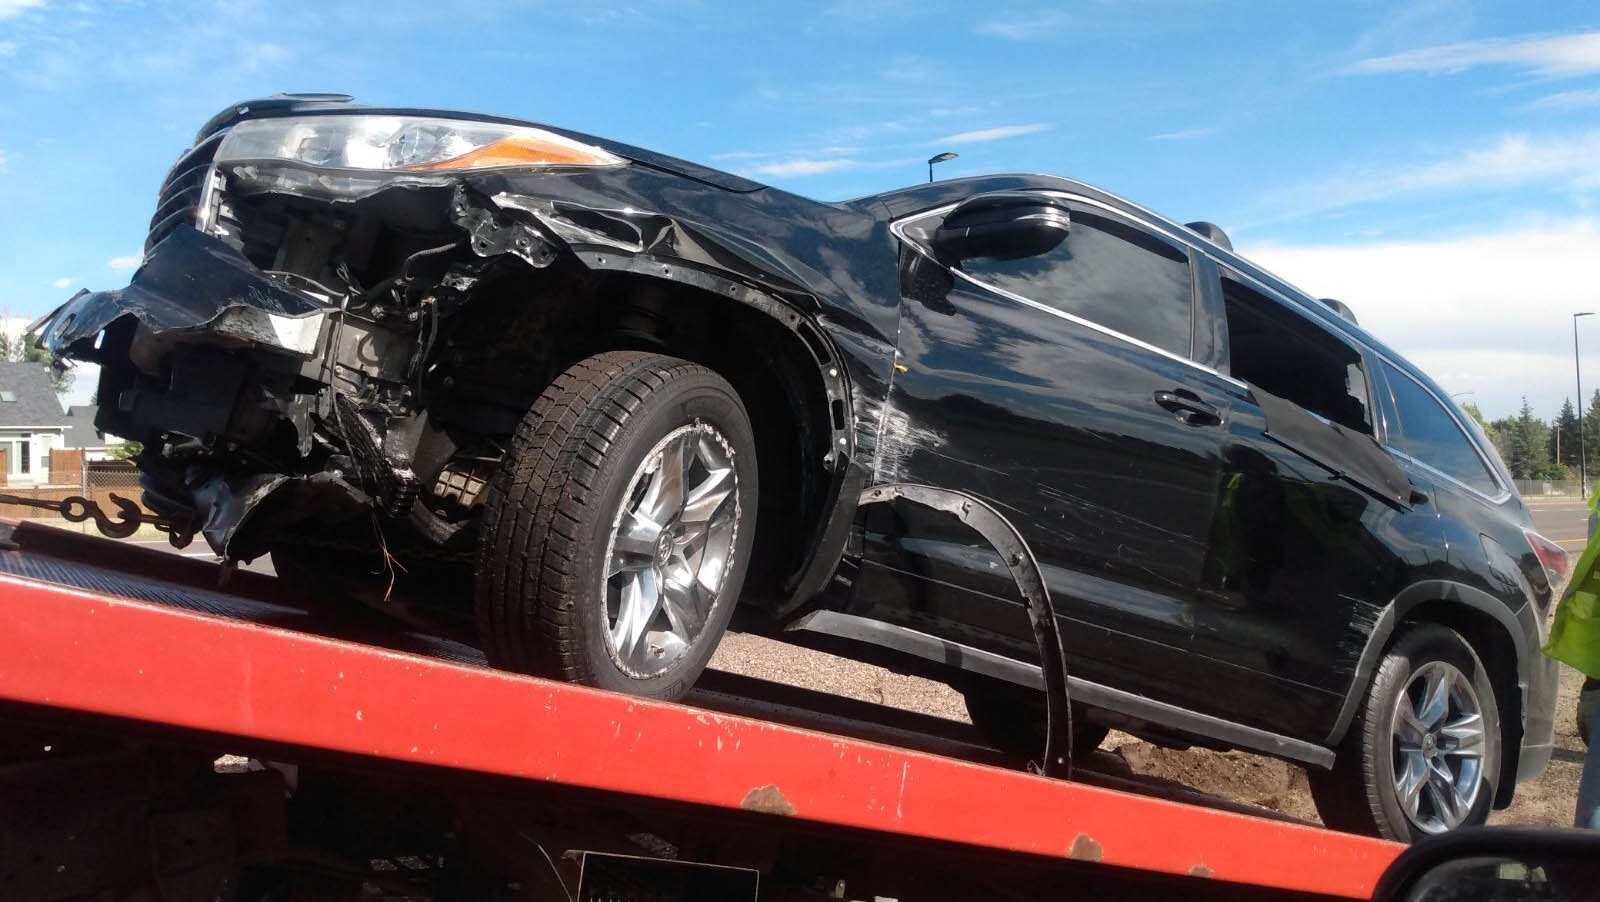 On the way to the hospital, Lynn Hutchings took a photo of the Toyota Highlander her husband Tom was driving.